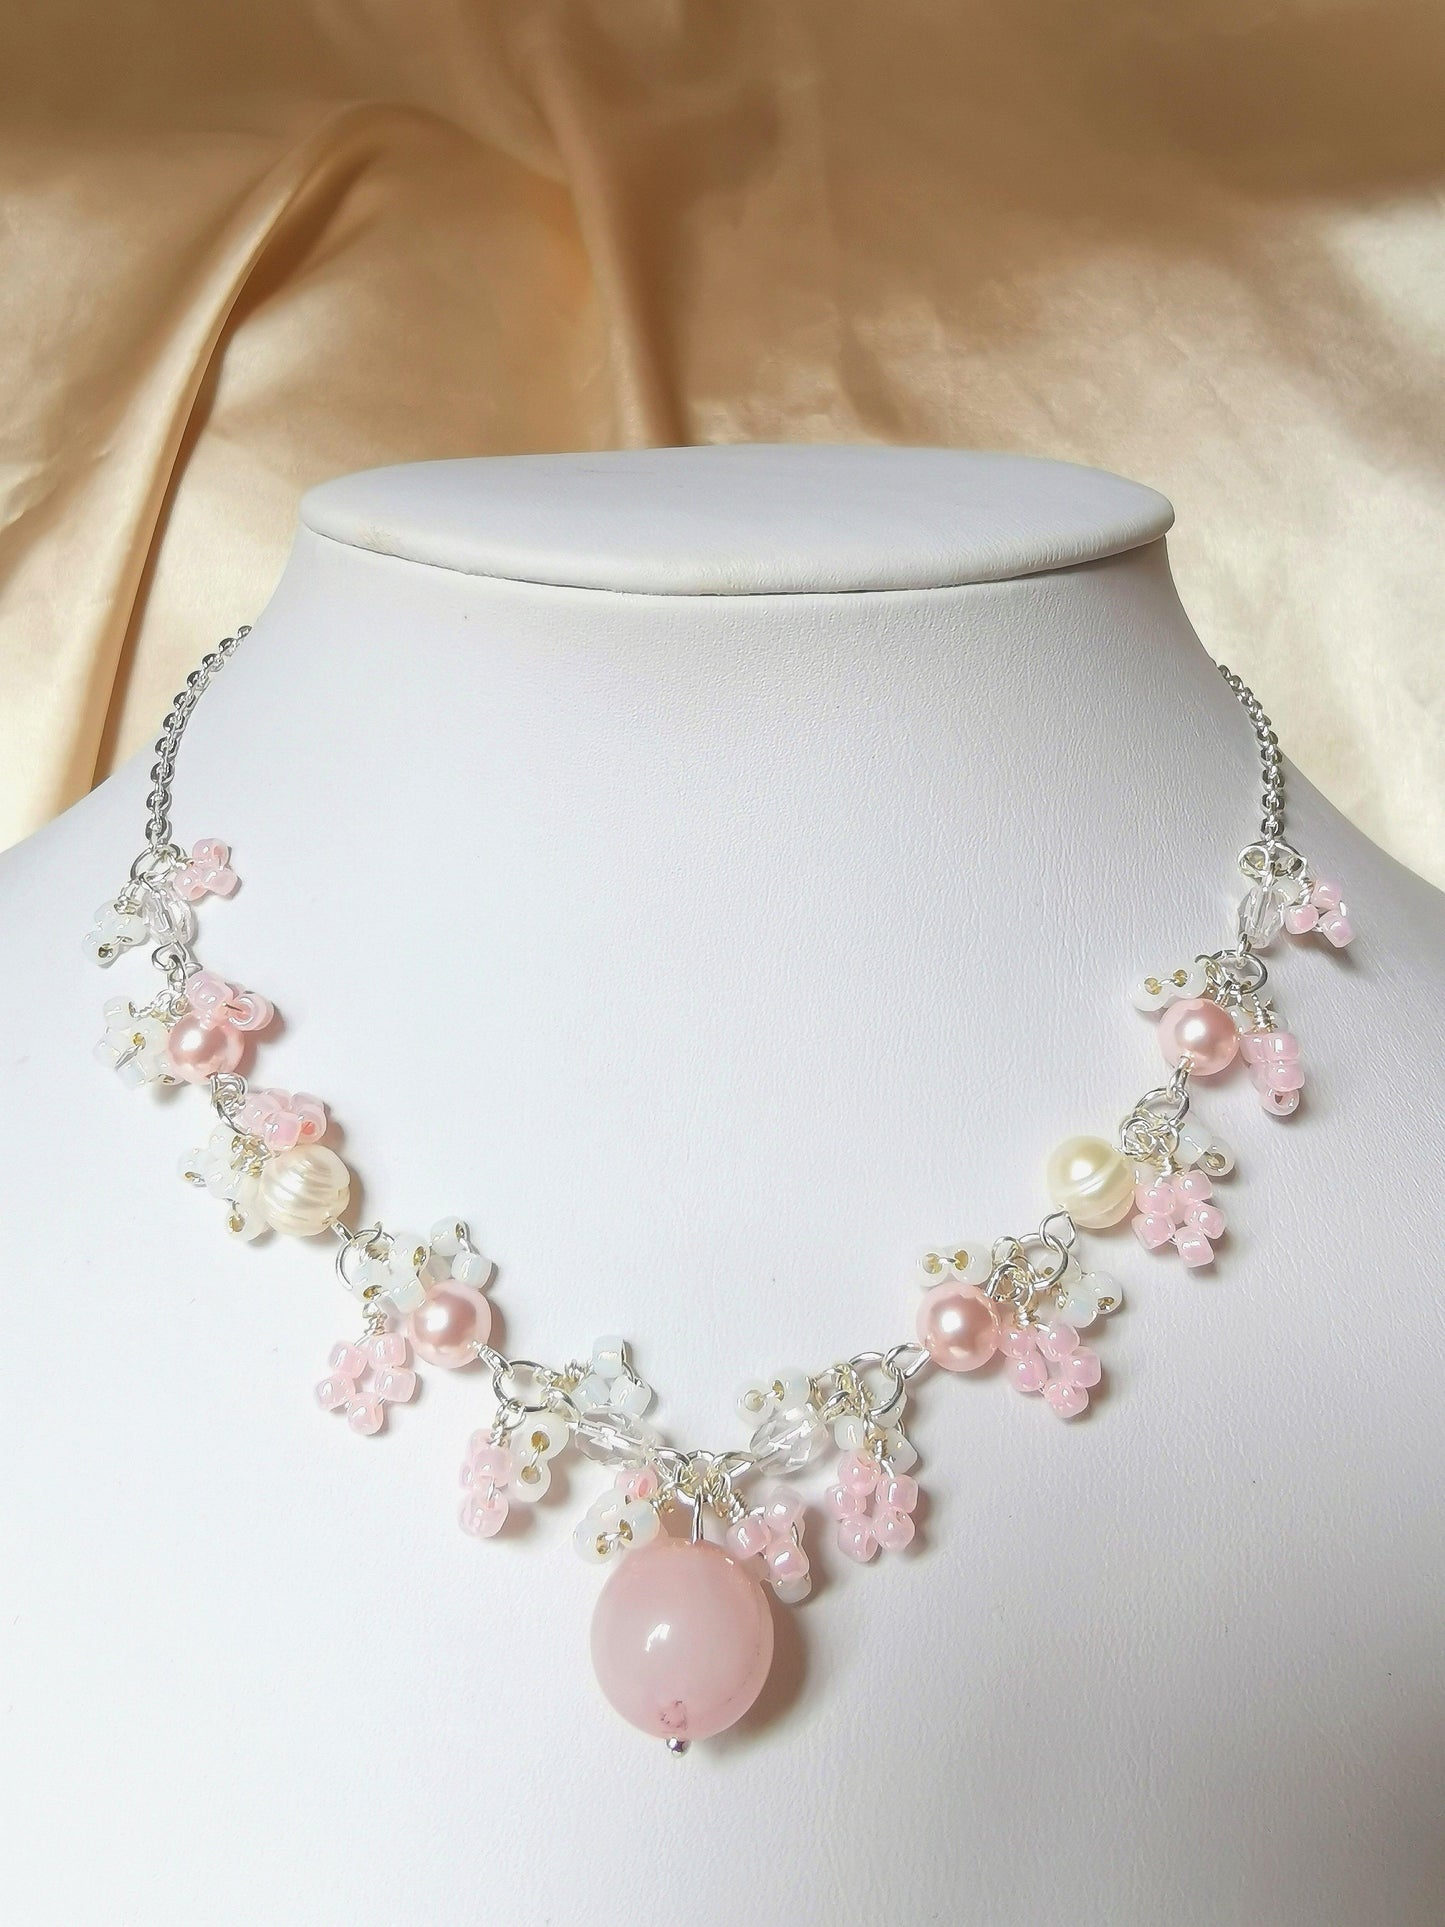 This is a handcrafted necklace where a rose quartz sphere pendant fans out to pink crystal pearls and white freshwater pearls, framed by white and pink seed bead details. The rest of the necklace is connected by silver-plated chain.